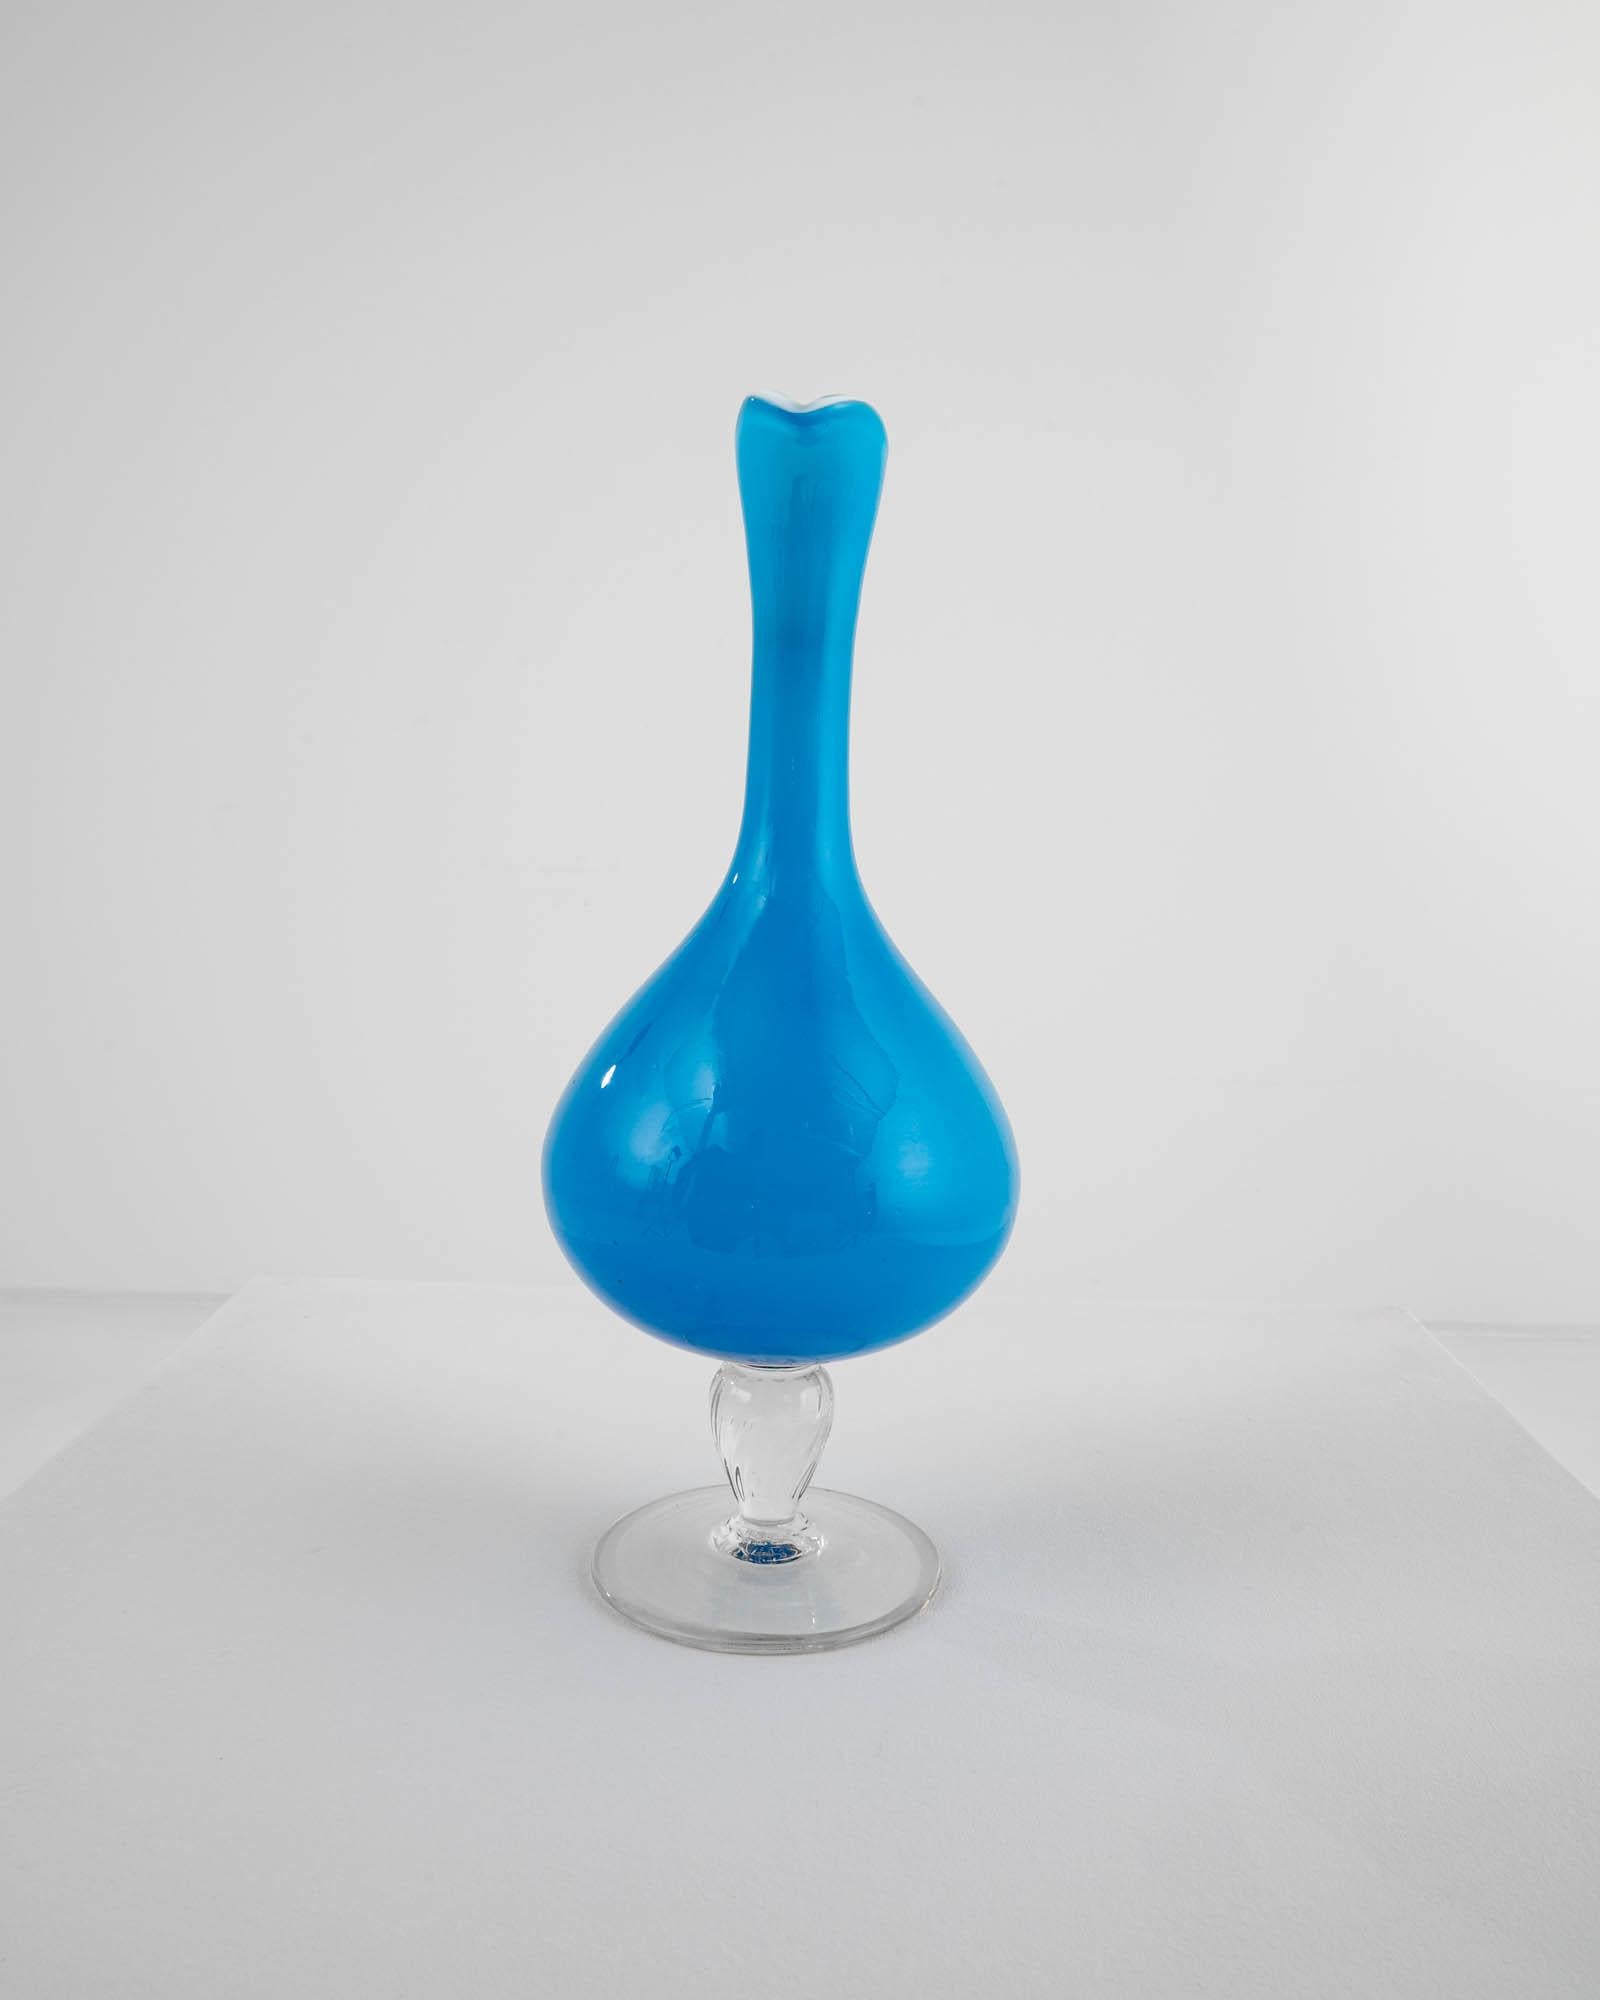 Romantic and striking, this glass vase offers a unique vintage accent. Made in Italy in the 1960s, the shape is elegant and piercing: a slender handle gracefully merges with the colored glass vessel. Beautifully crafted, the semi-translucent glass